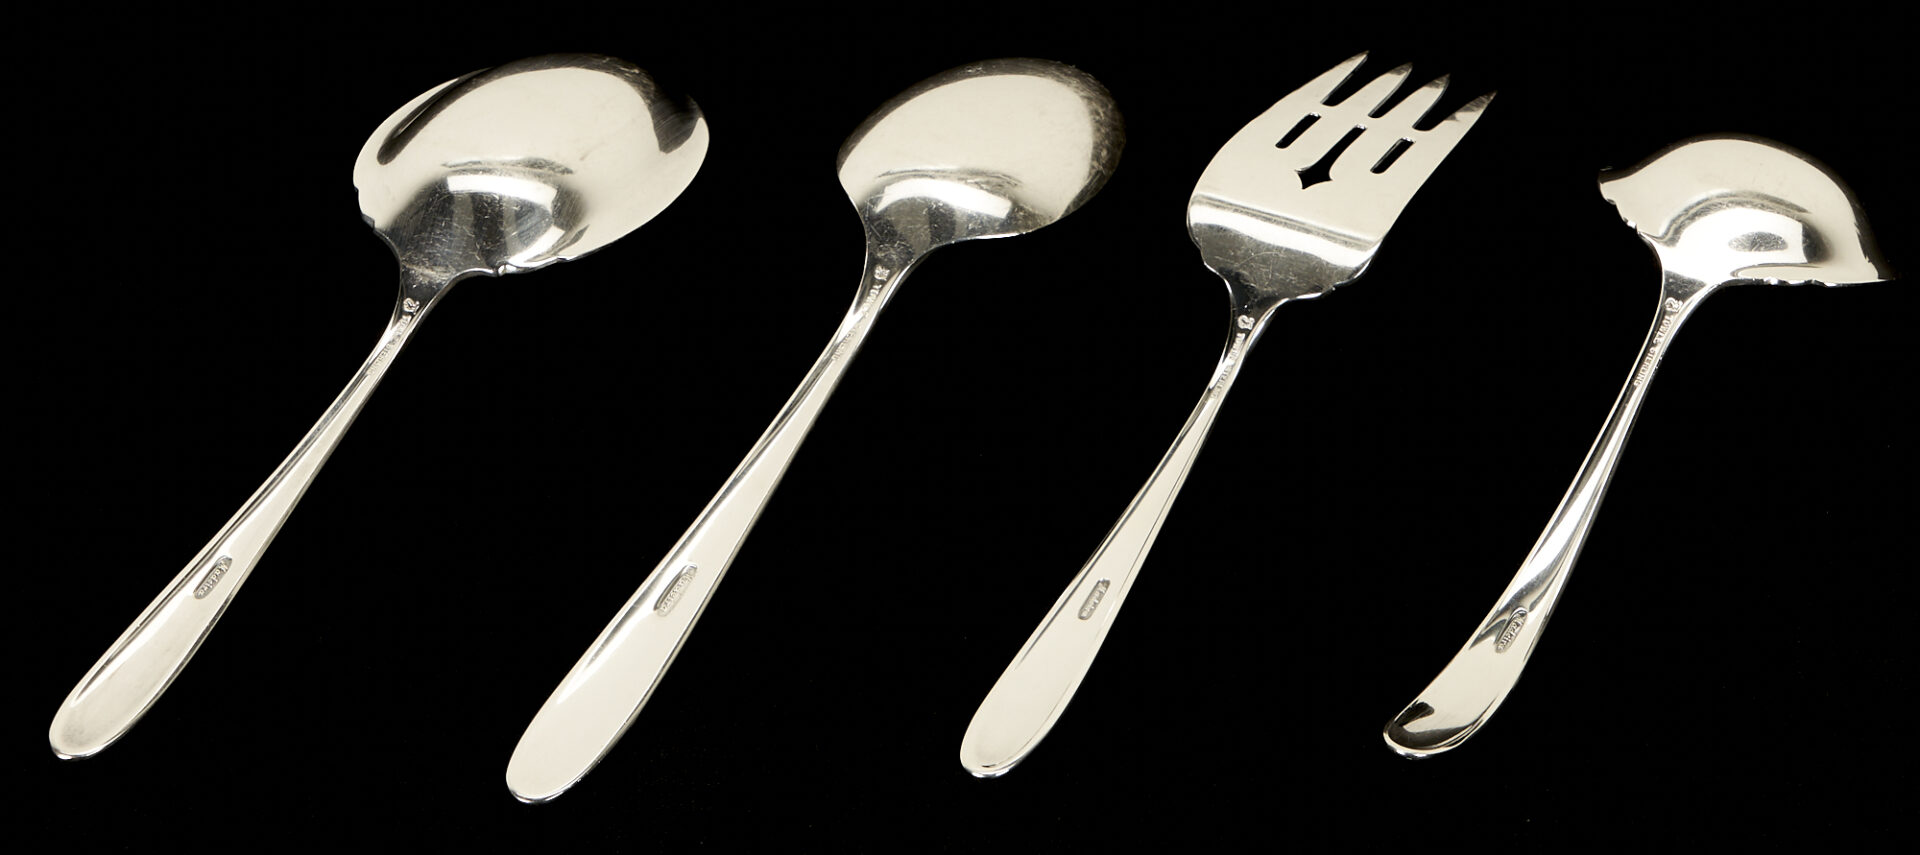 Lot 334: 53 Pcs. Towle Madeira Sterling Silver Flatware, Service for 8